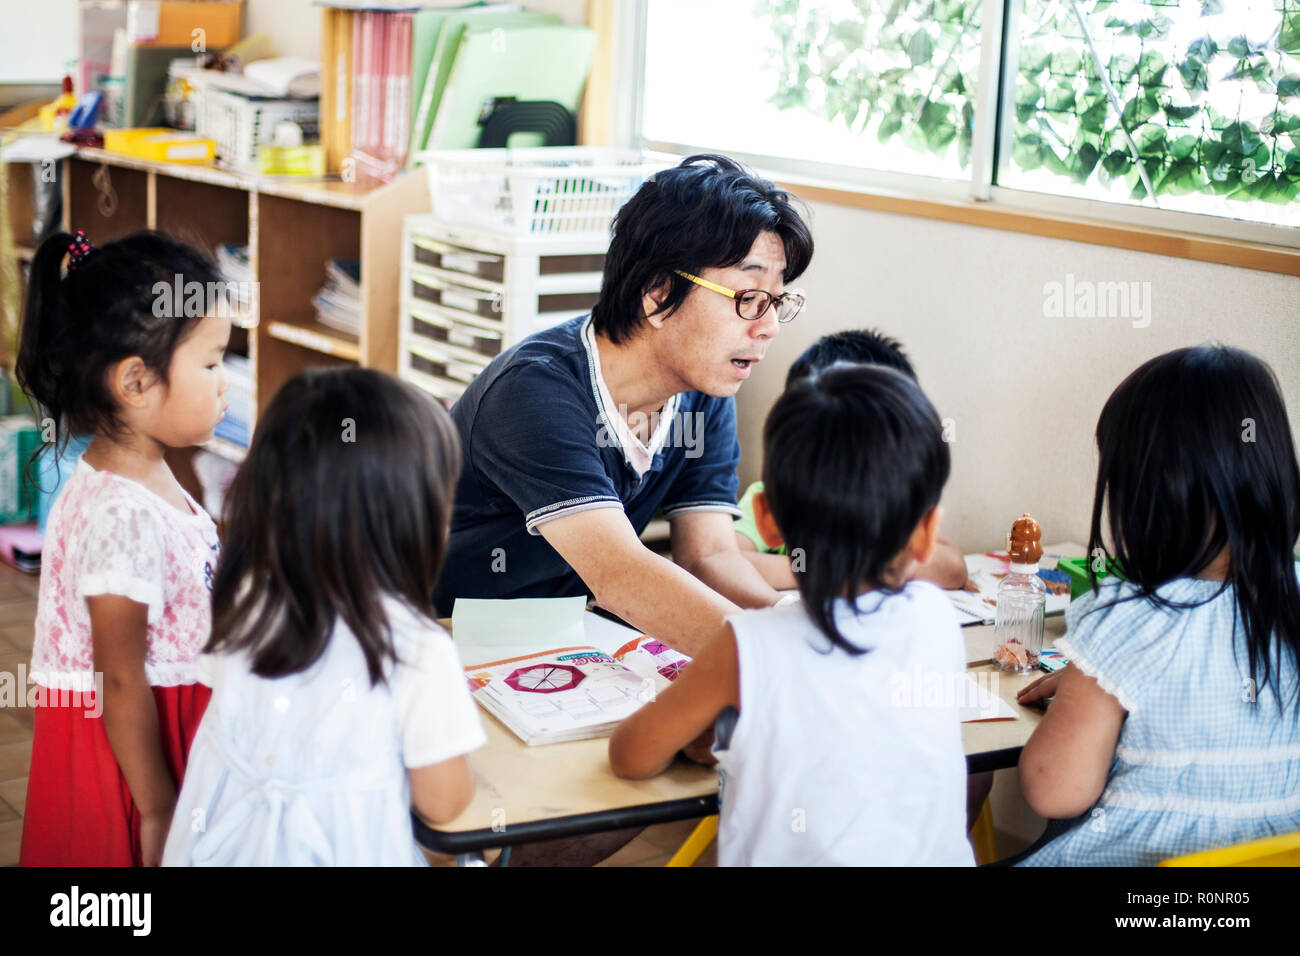 Male teacher talking to group of children at a table n a Japanese preschool. Stock Photo